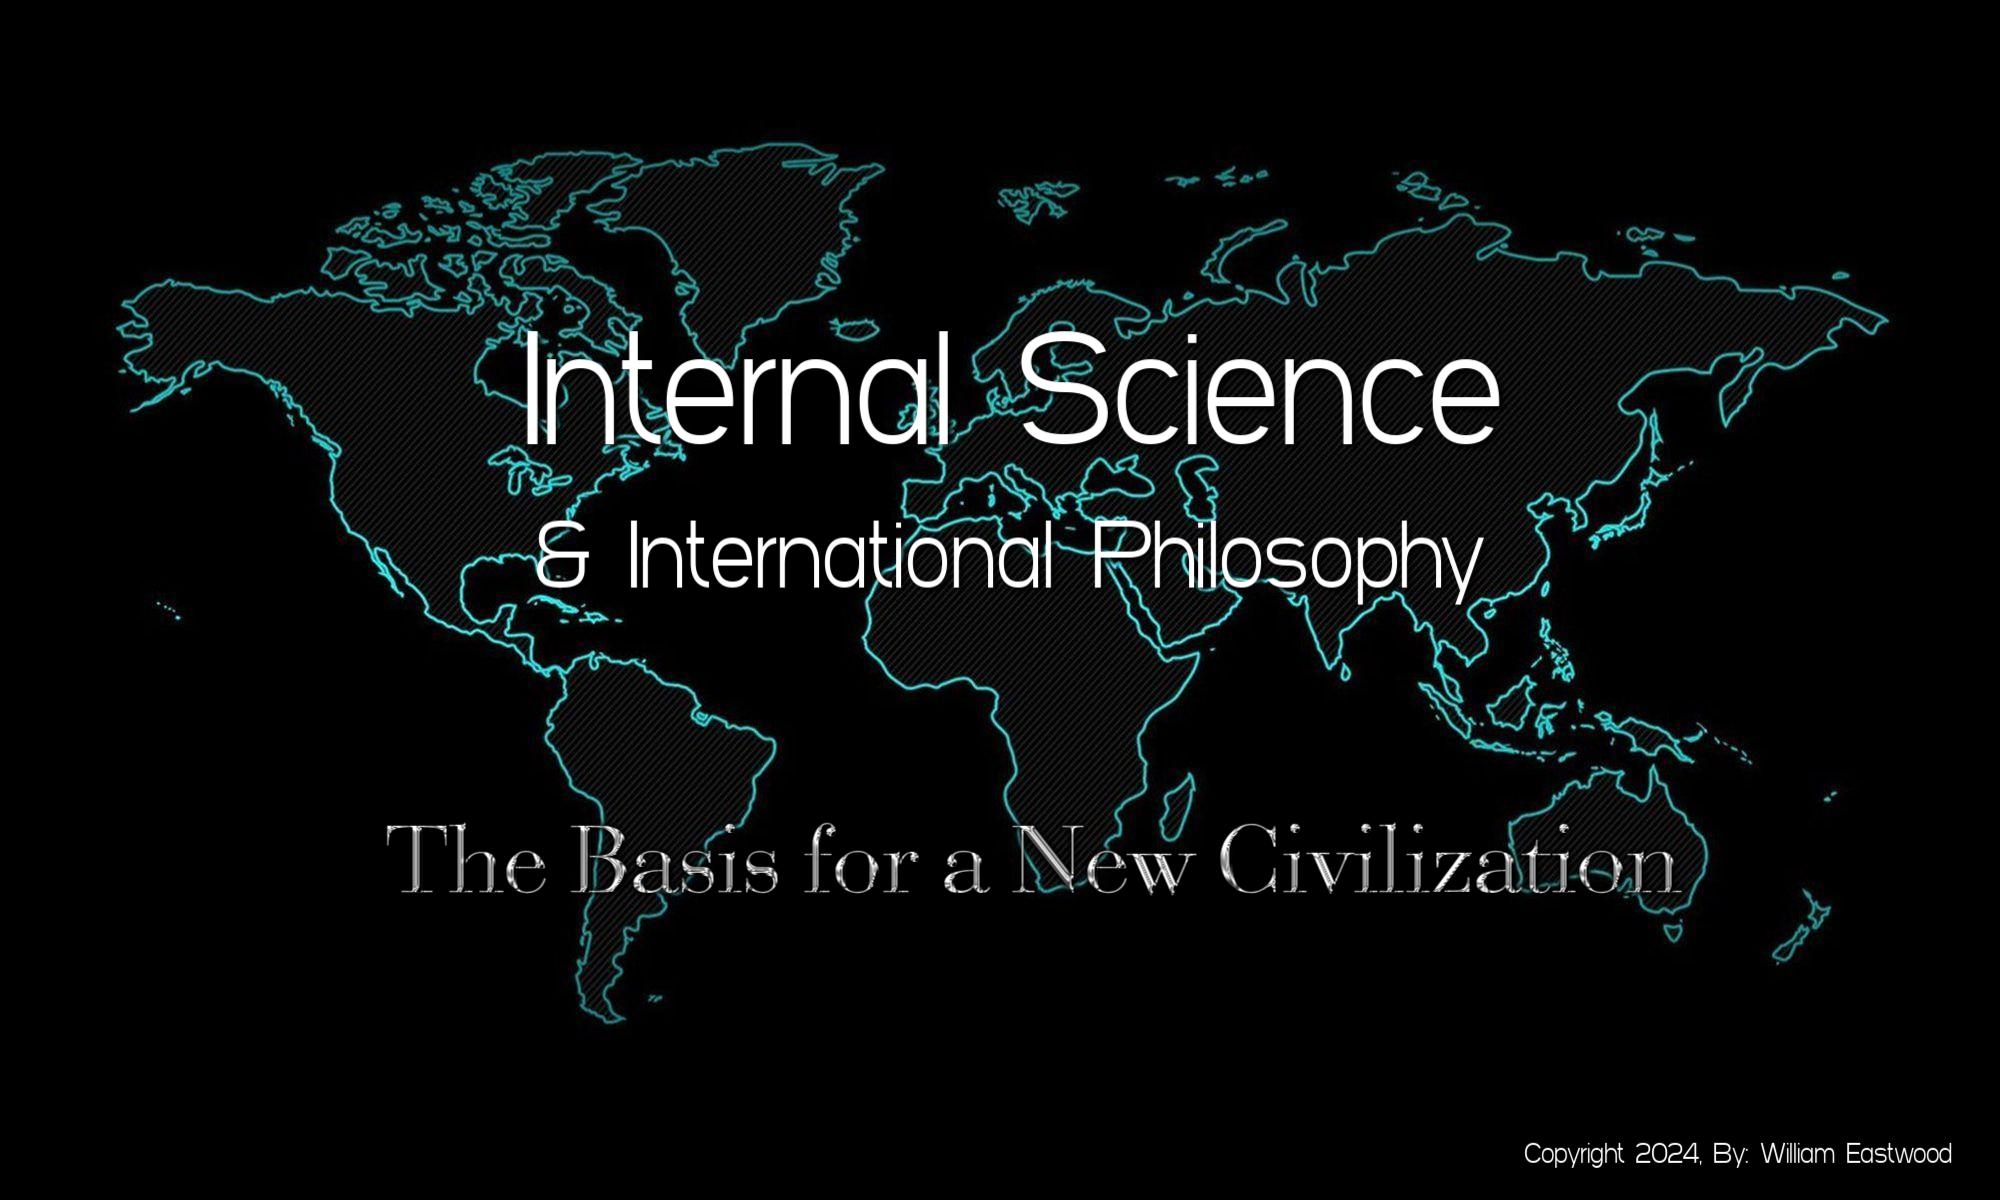 The Internal Science & International Philosophy of William Eastwood to solve world problems